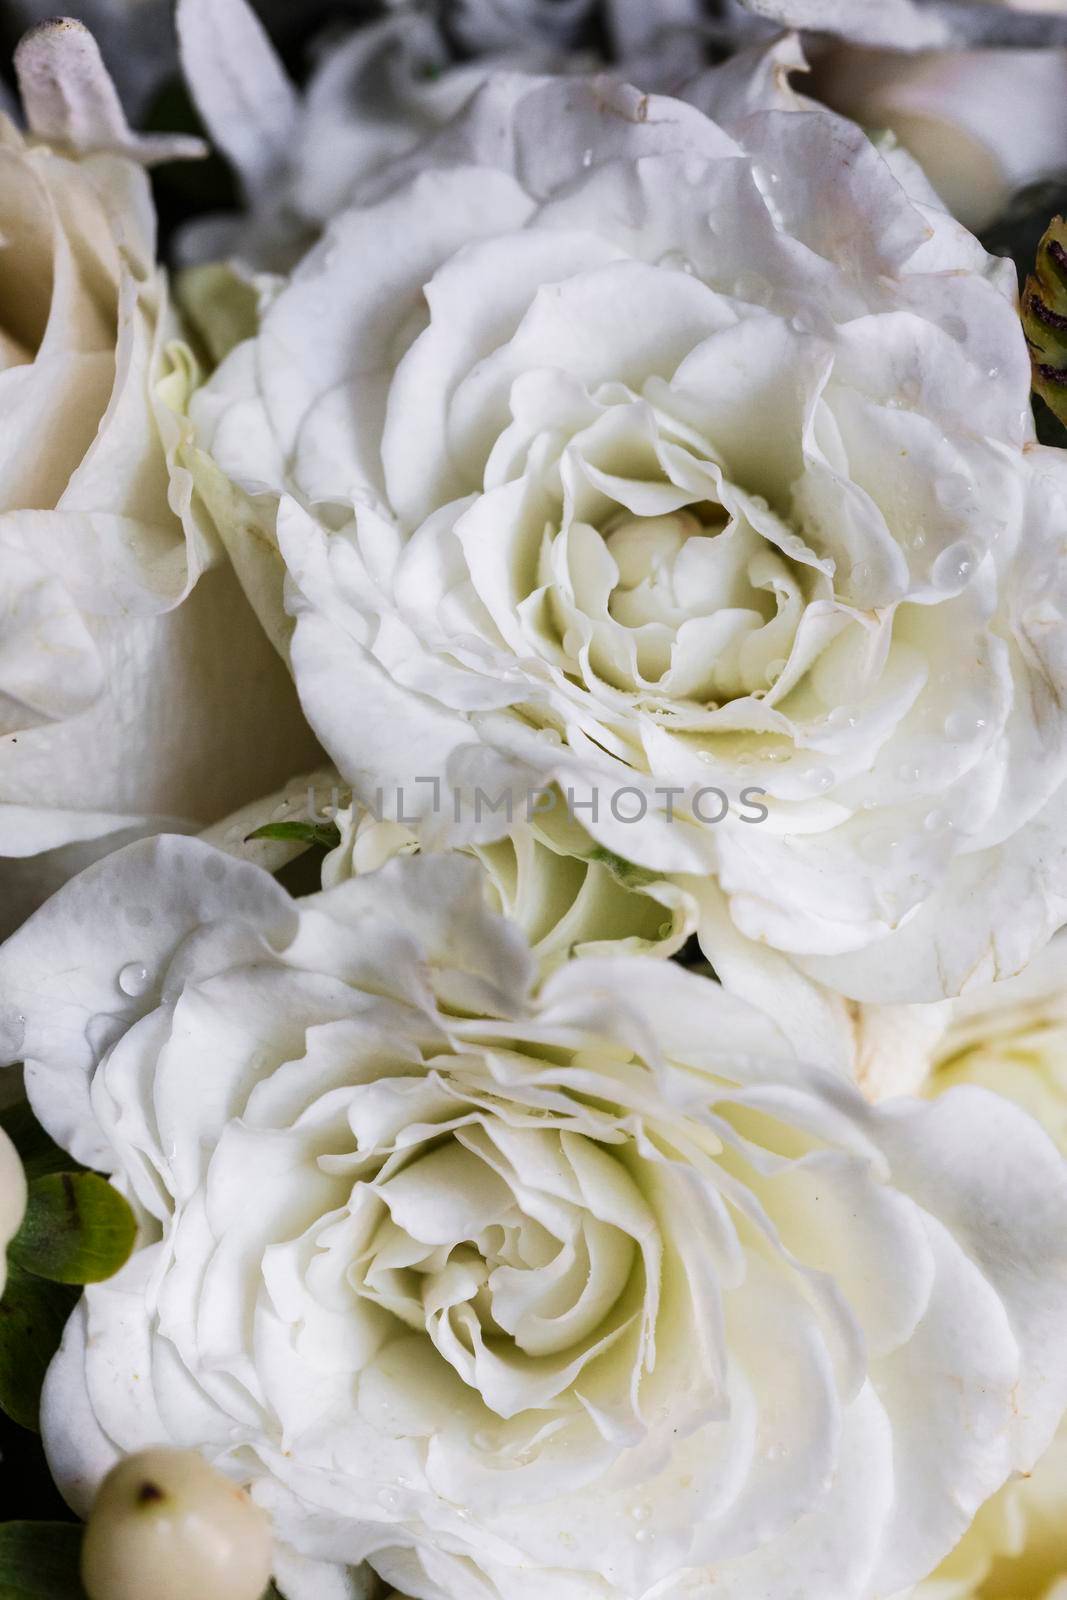 detail of roses and decorative flowers used to celebrate weddings